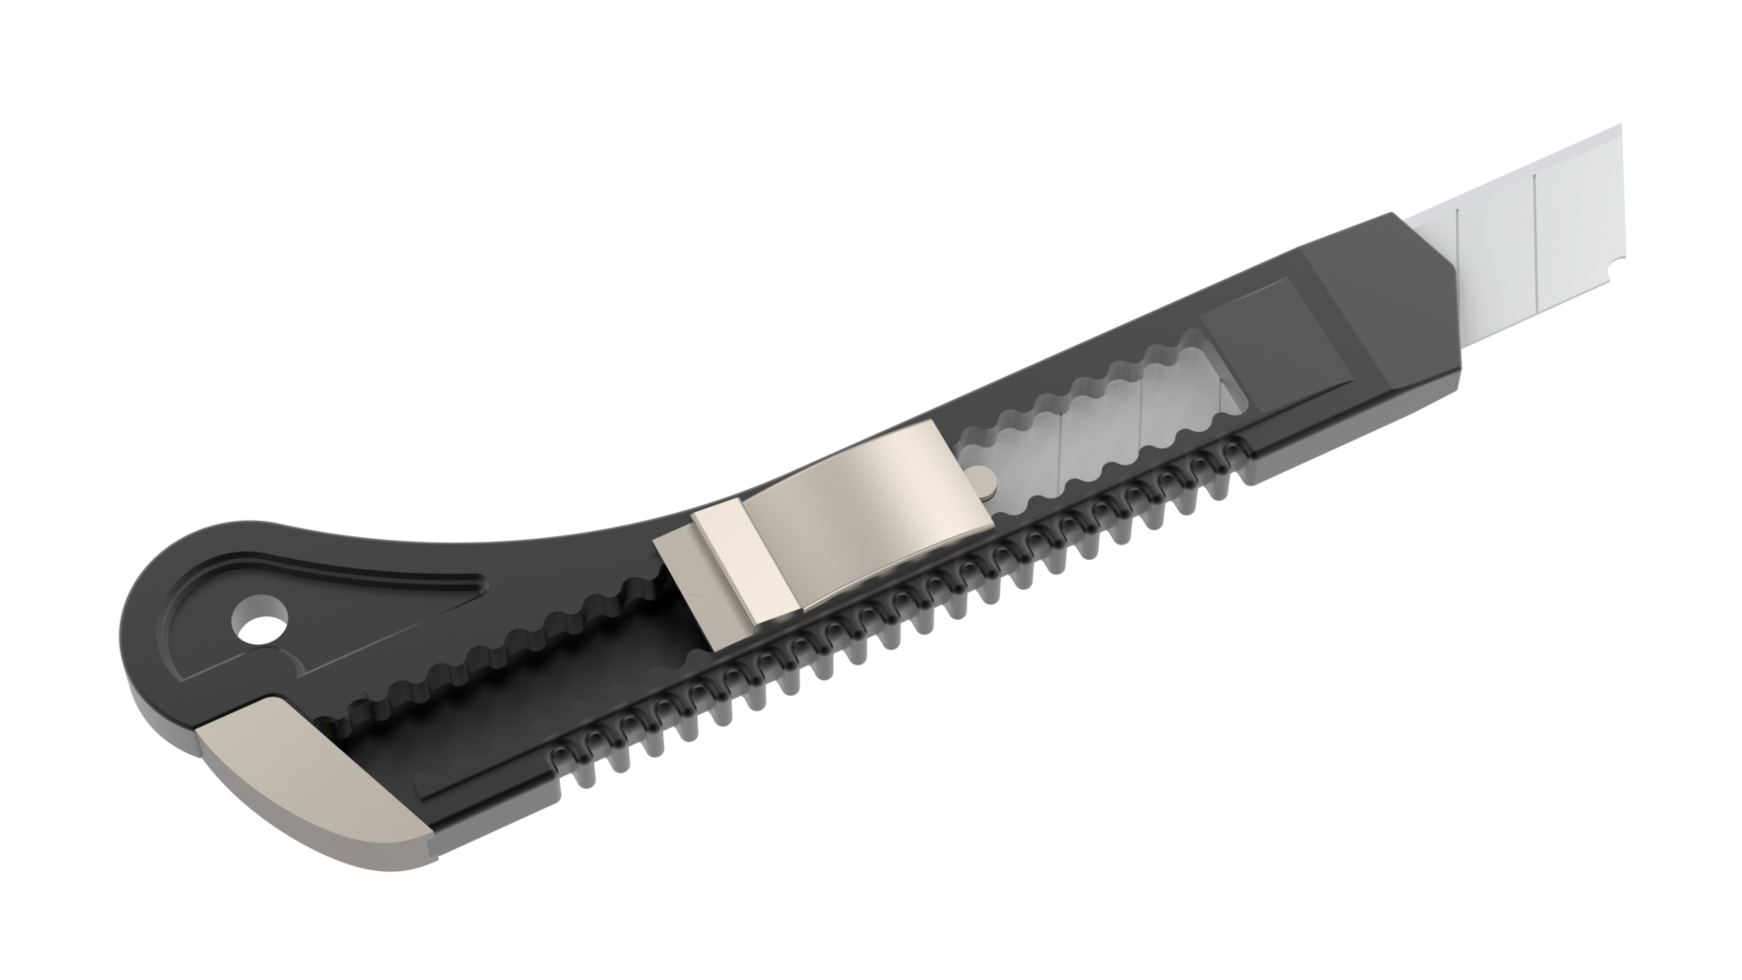 Cutter knife isolated on background. 3d rendering - illustration png